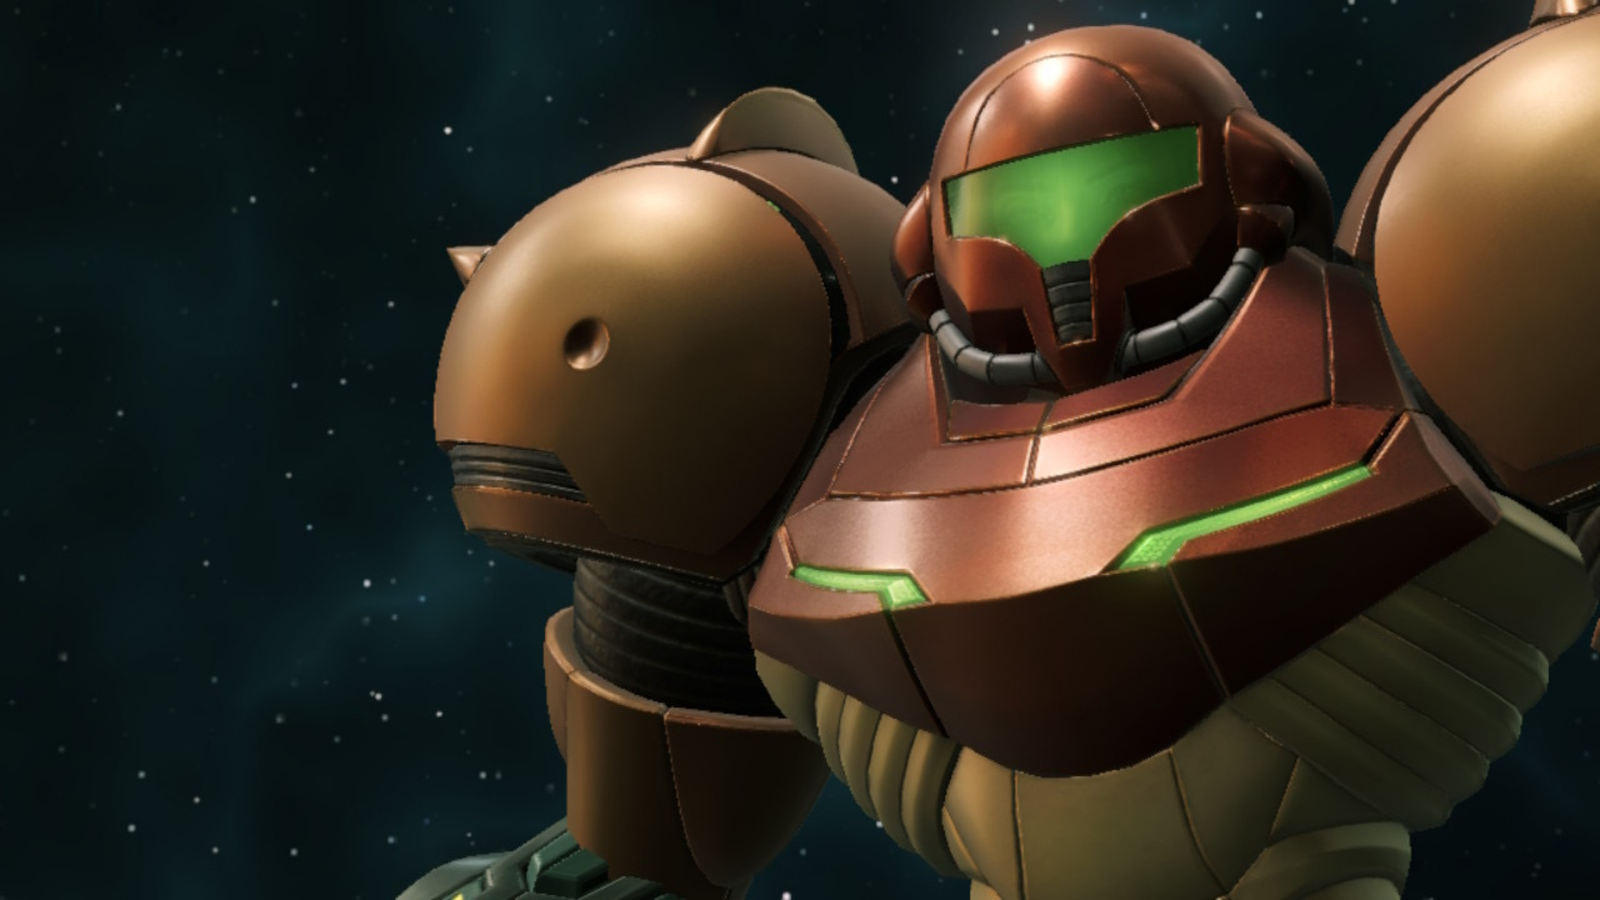 Metroid Prime Remastered Complete Guide: Walkthrough with Tips